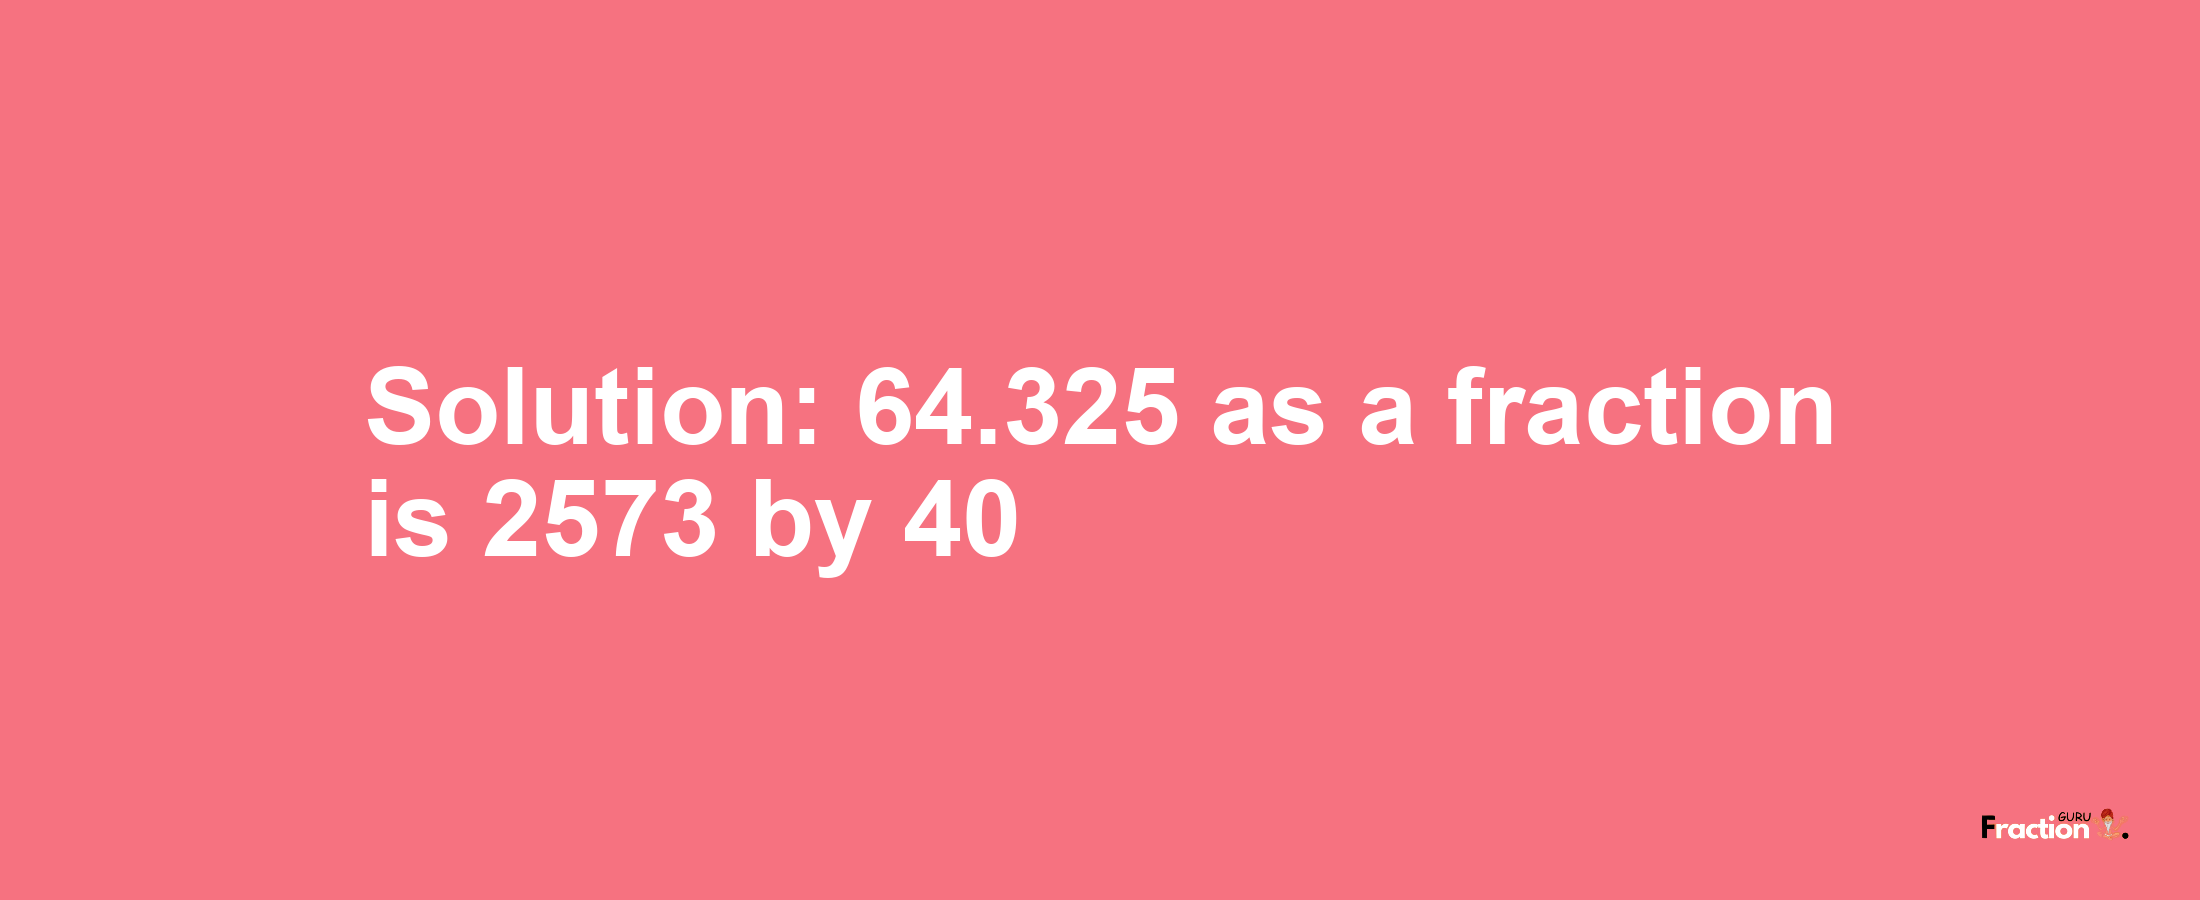 Solution:64.325 as a fraction is 2573/40